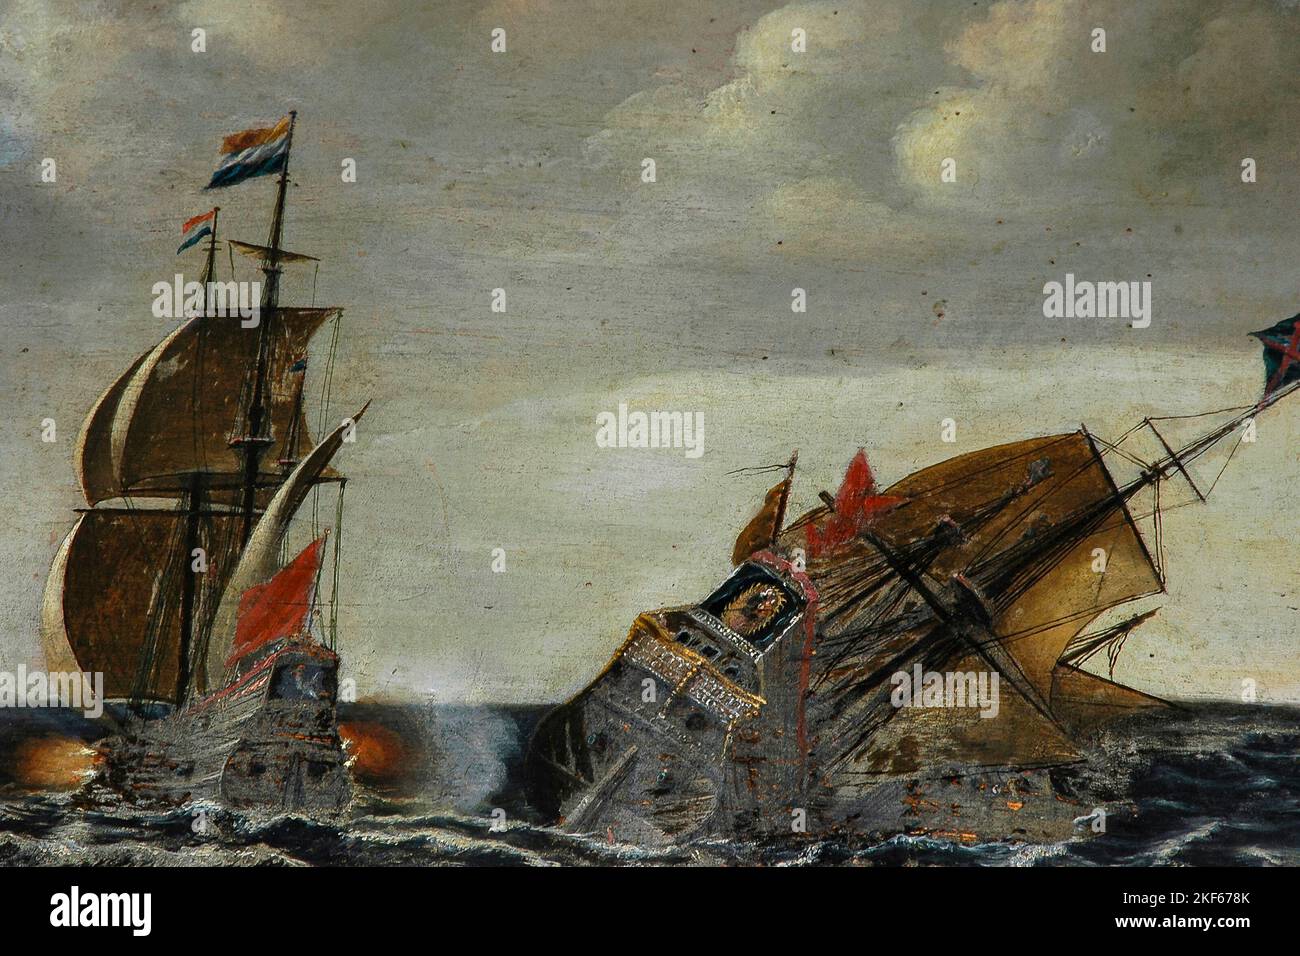 A Dunkirk privateer vessel sinks as a ship captained by Dutch Golden Age naval hero Cornelis Janszoon de Haan (1580-1633), known as Haantje or Rooster, rakes it with cannon fire.  Detail of oil painting on his gilded Baroque monument in the Oude Kerk (Old Church) in Ouderkerksplein, Amsterdam, North Holland, Netherlands. Stock Photo